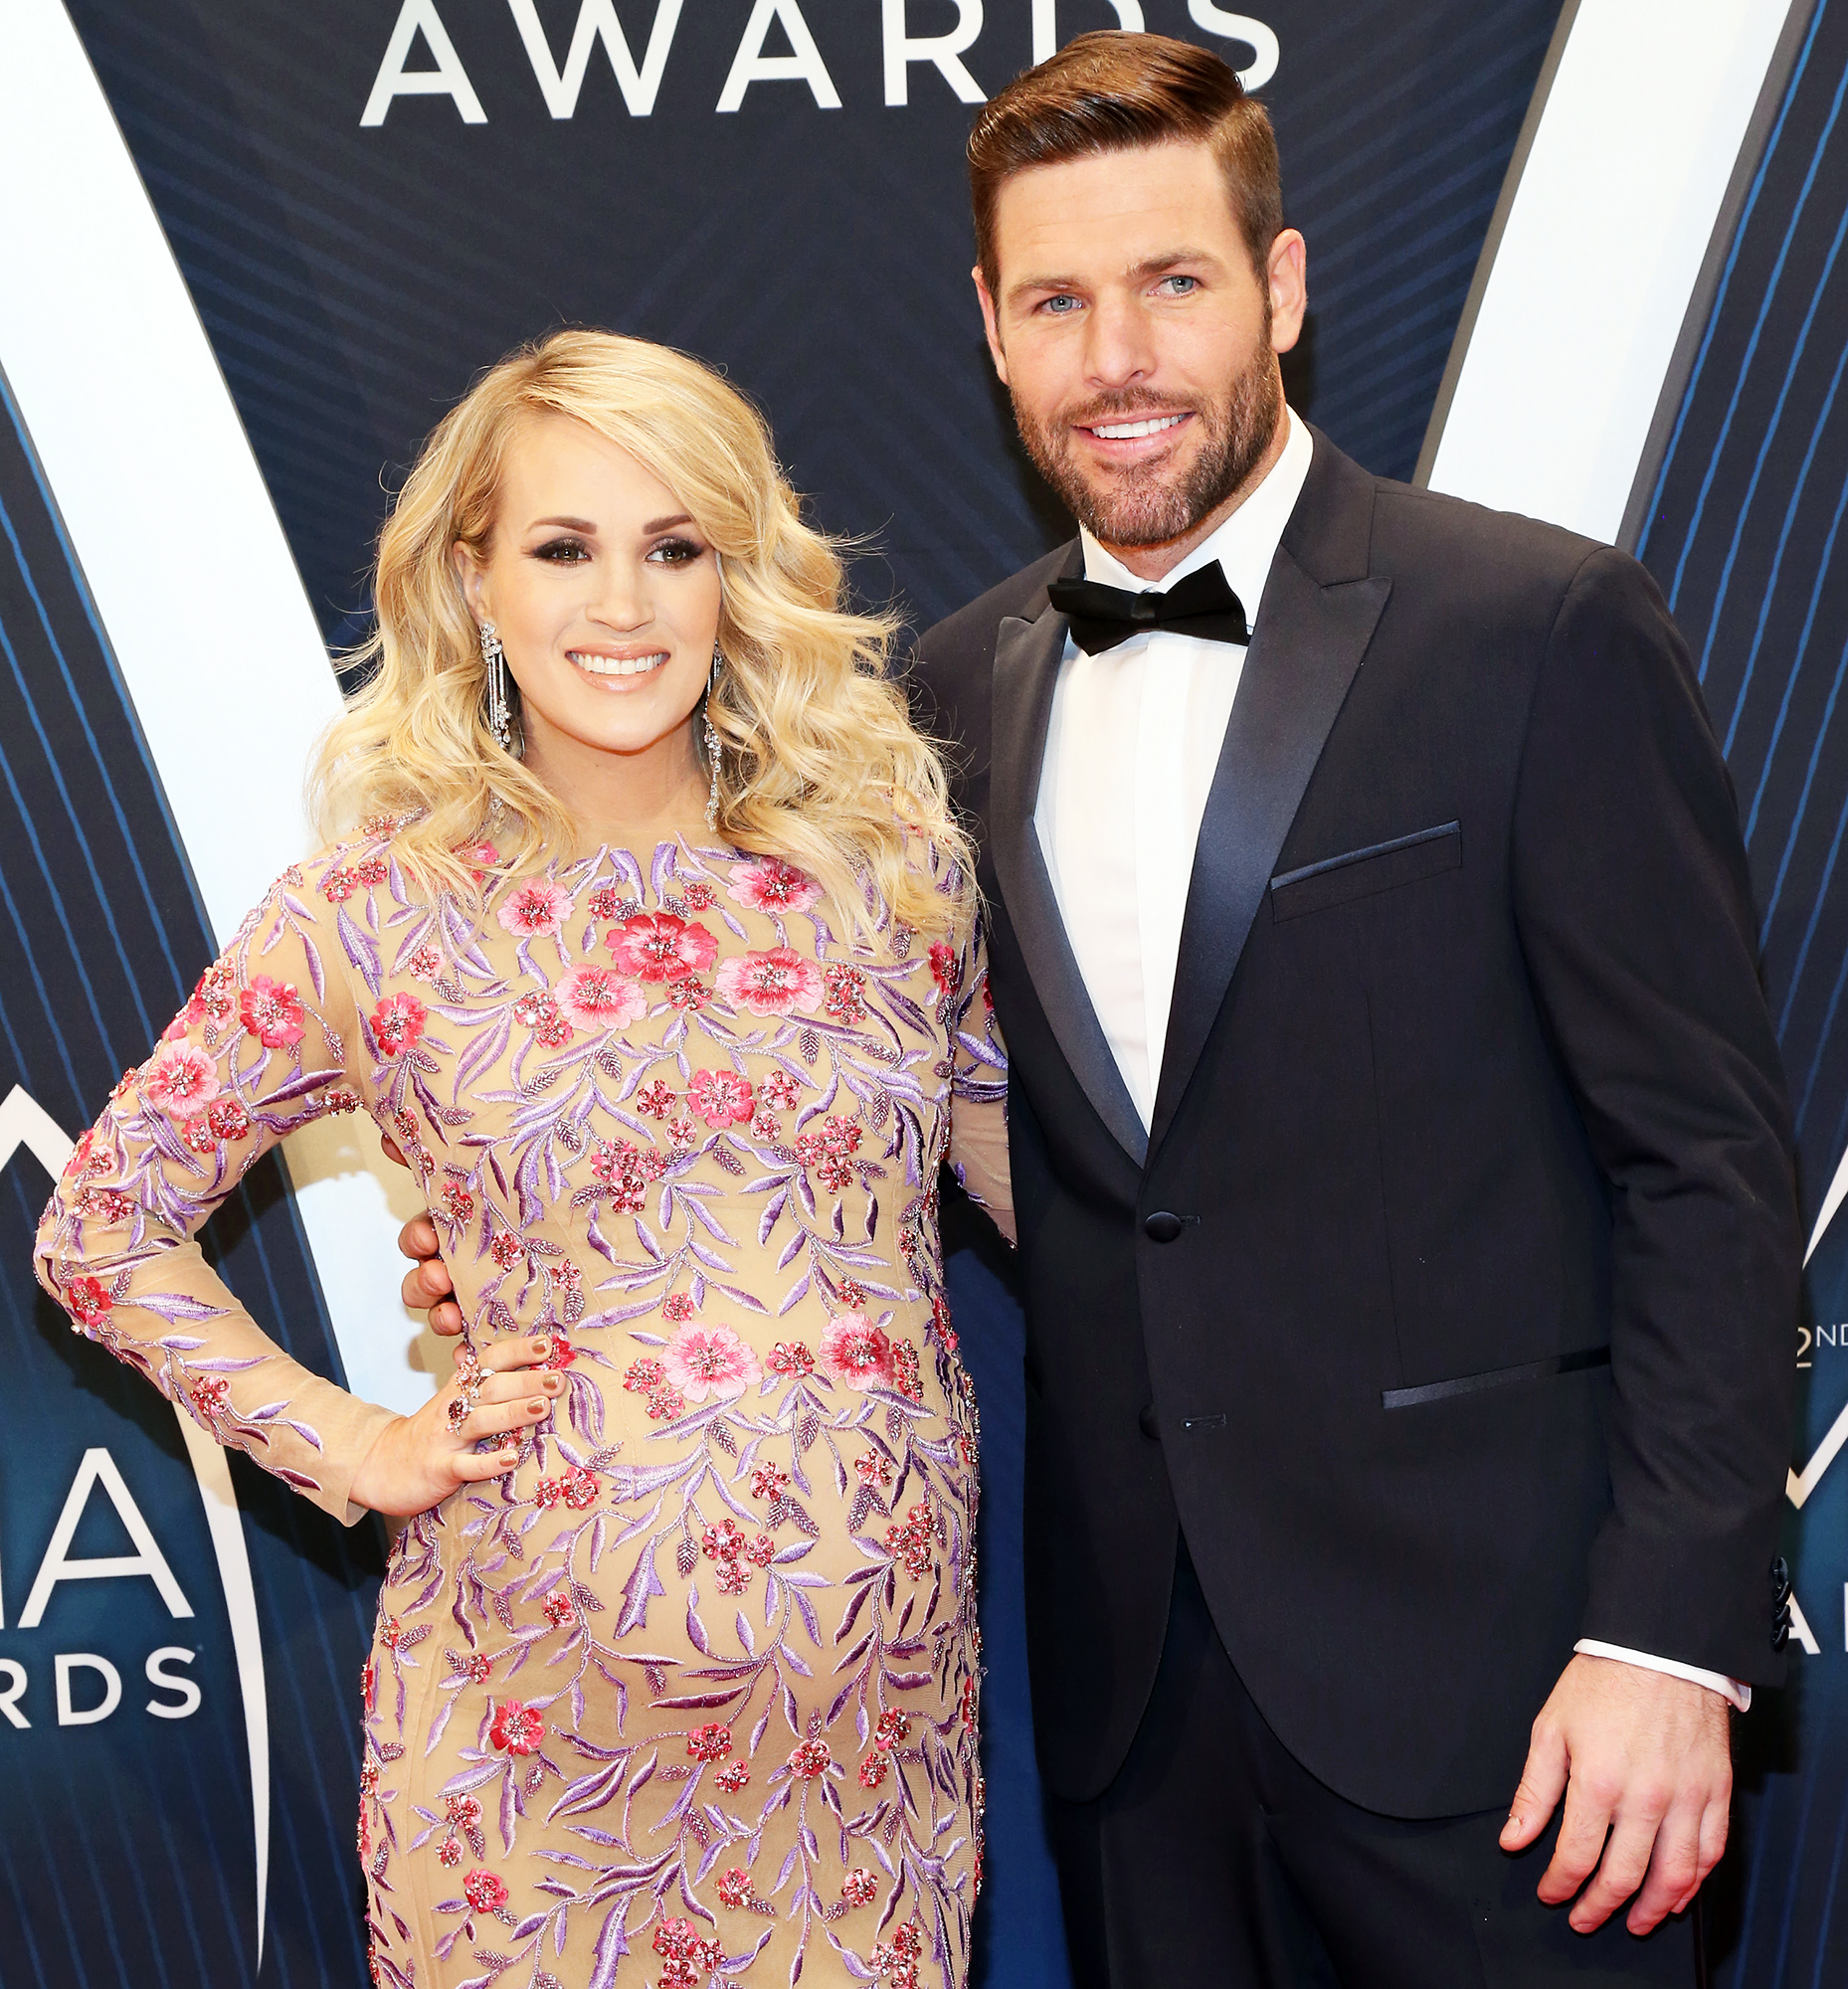 The Truth About Carrie Underwood's Husband Mike Fisher